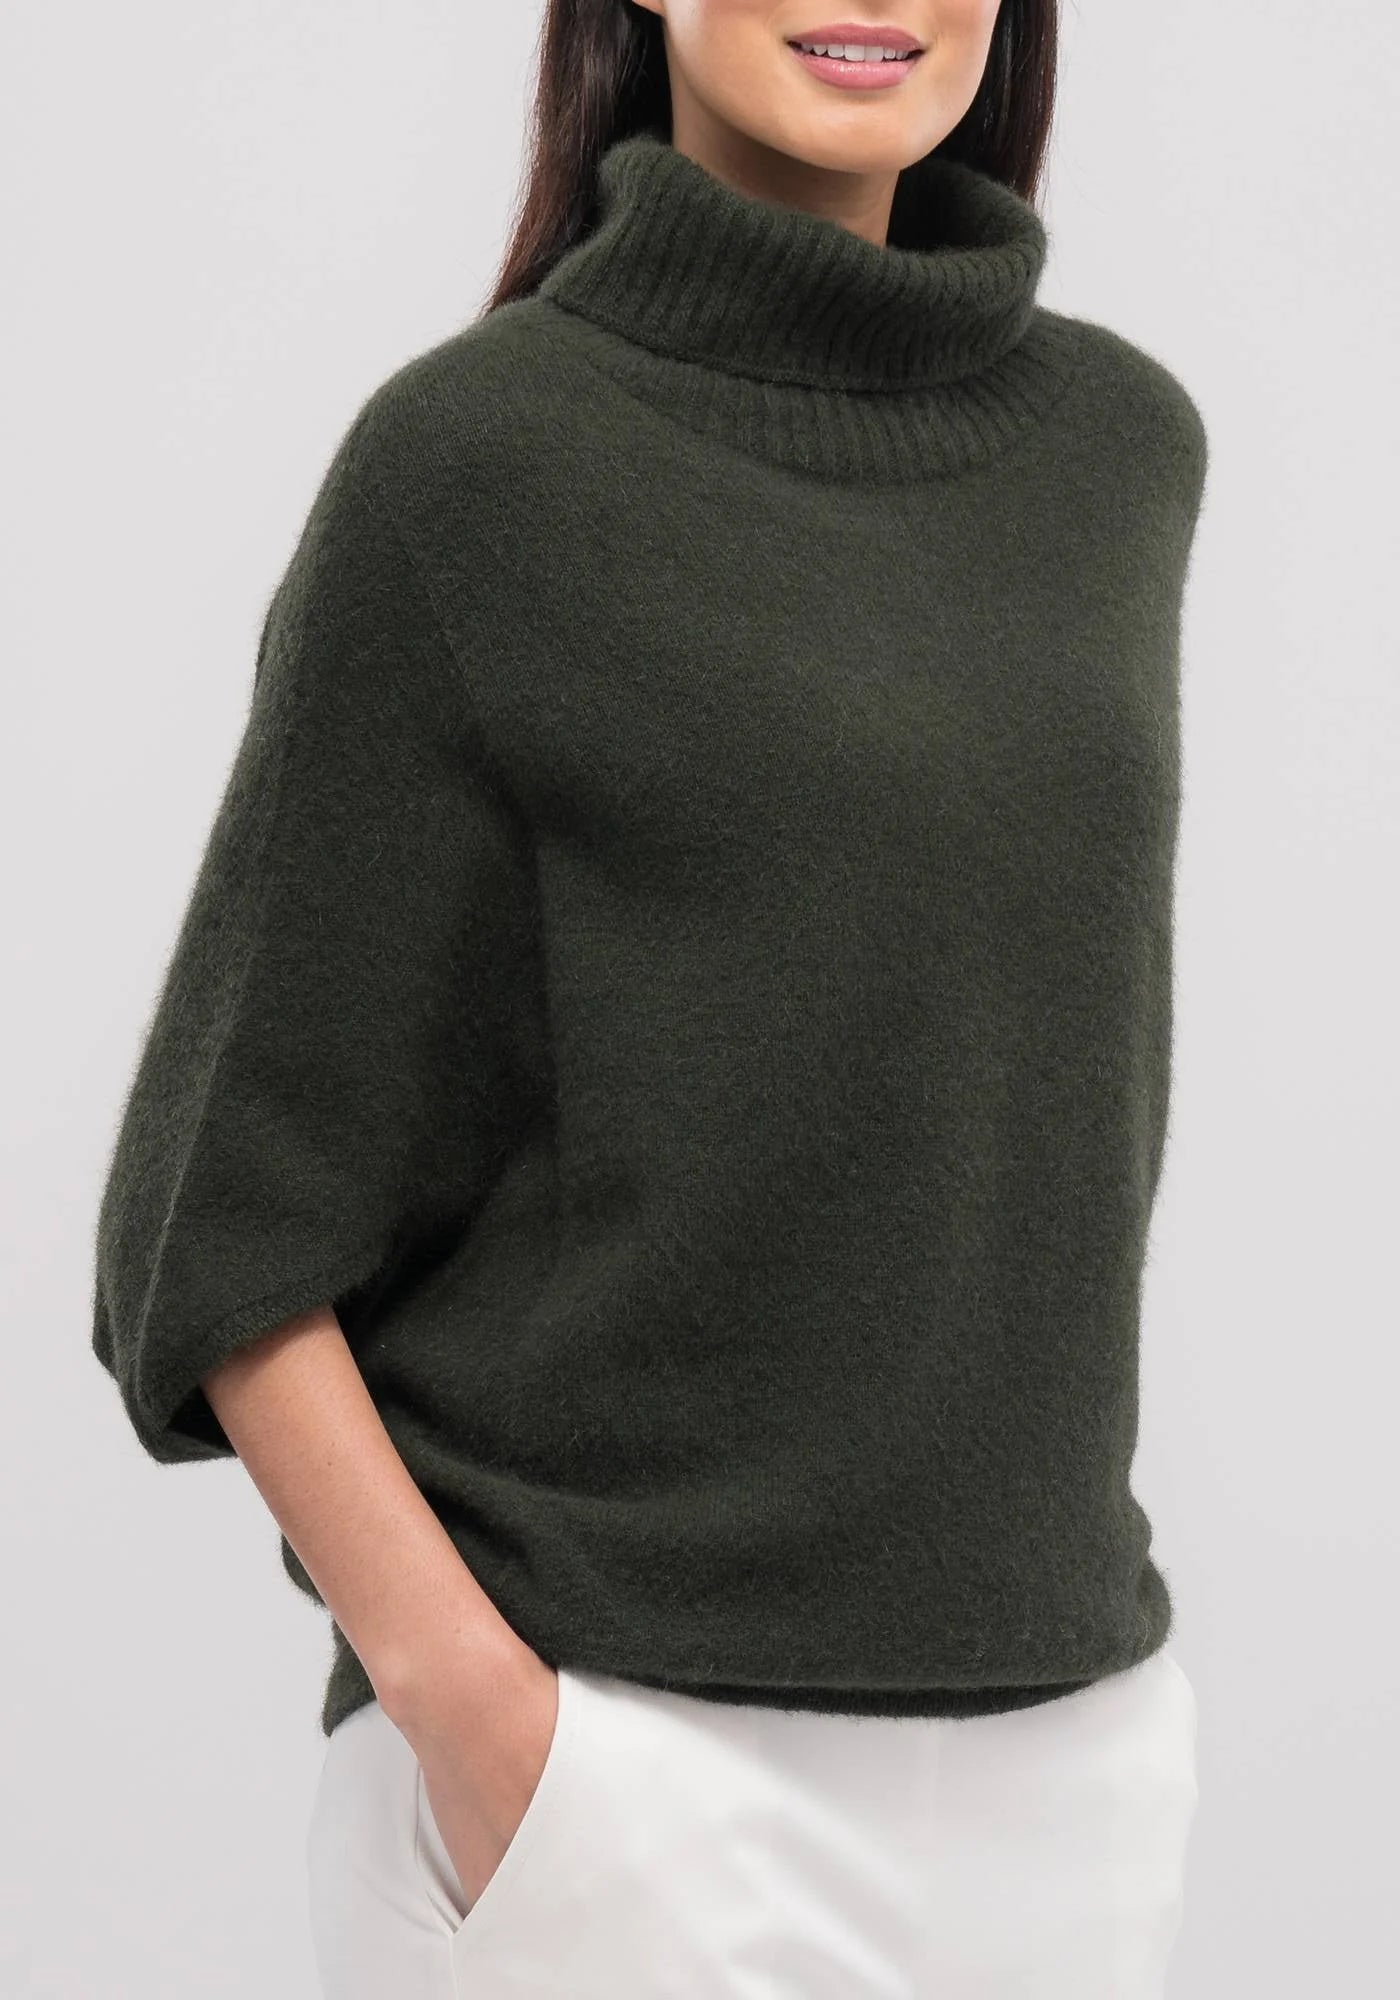 Untouched World - Air Cape Sweater